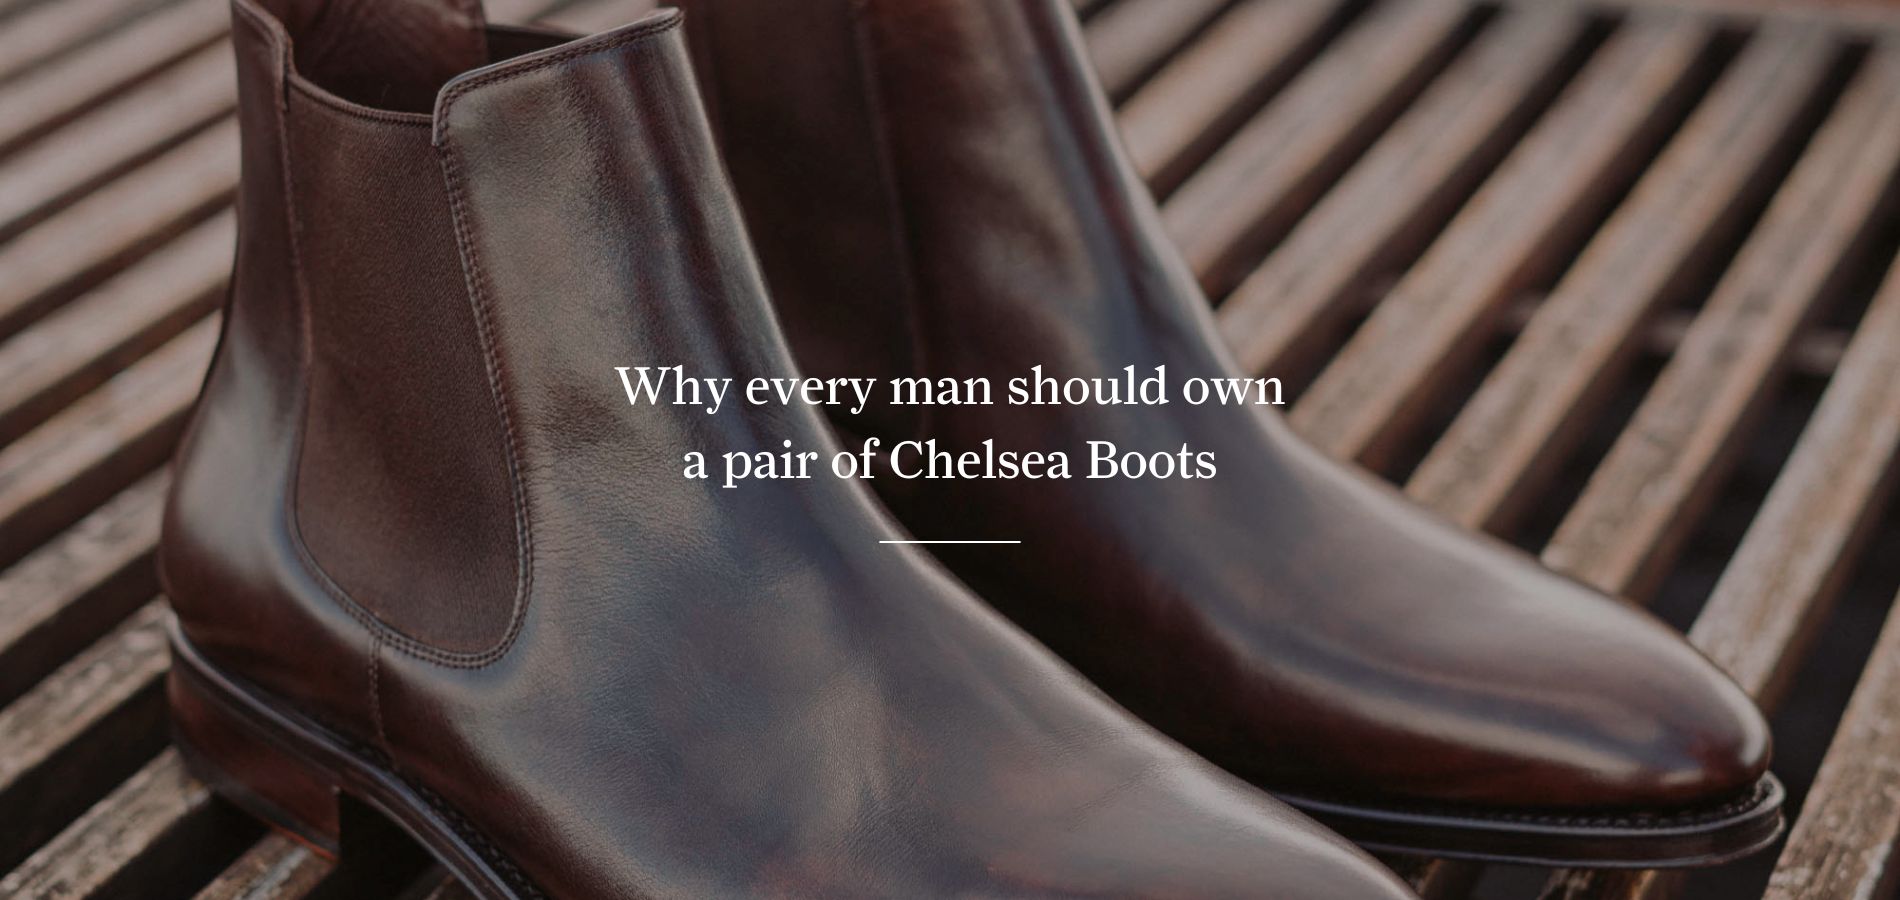 Why every man should own a pair of chelsea boots